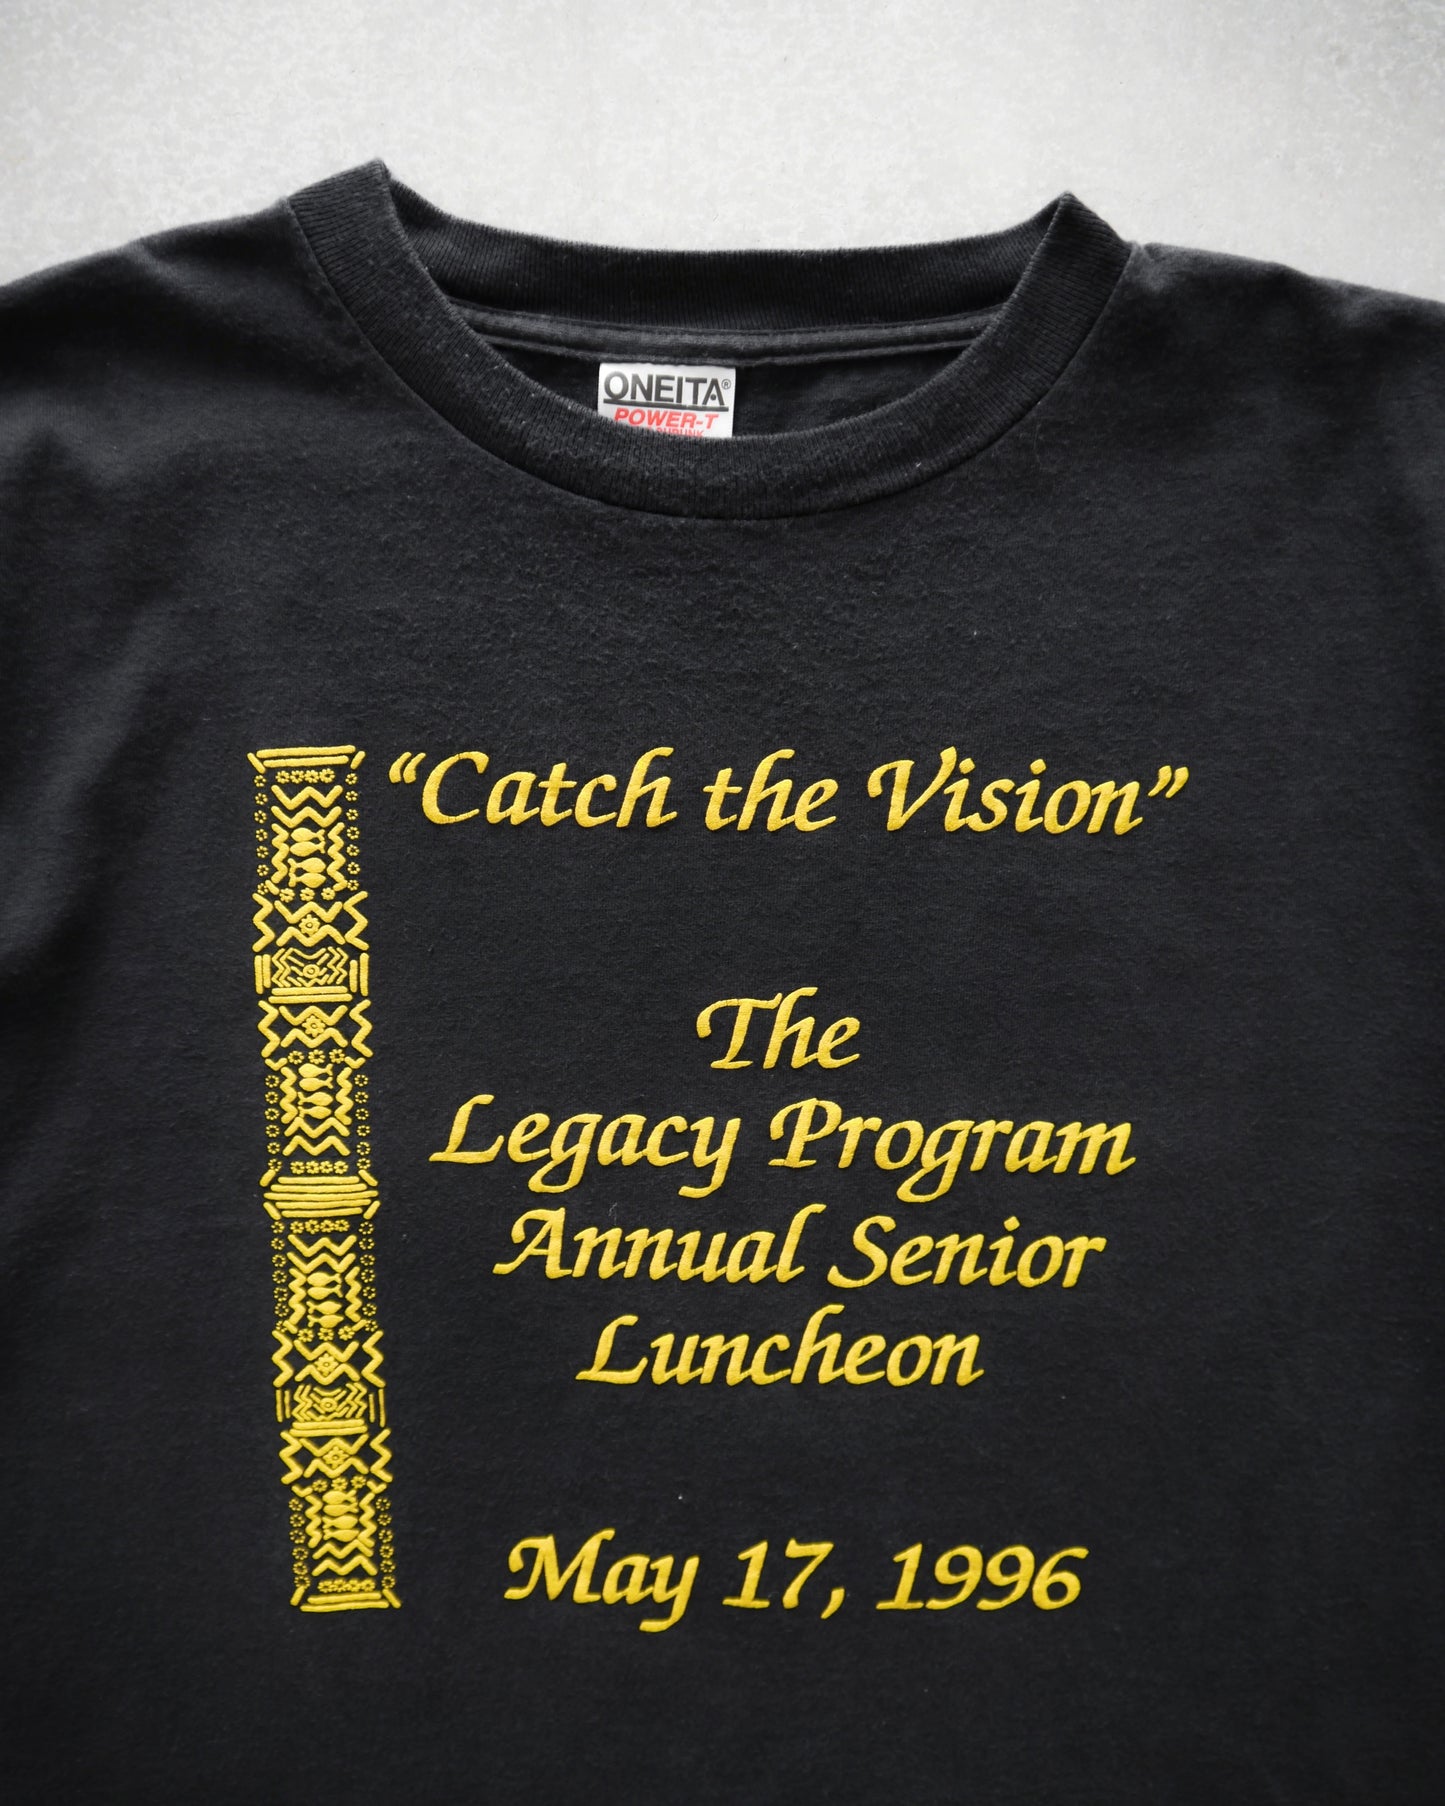 90s “Catch the Vision” Boxy Black Tee (XL)